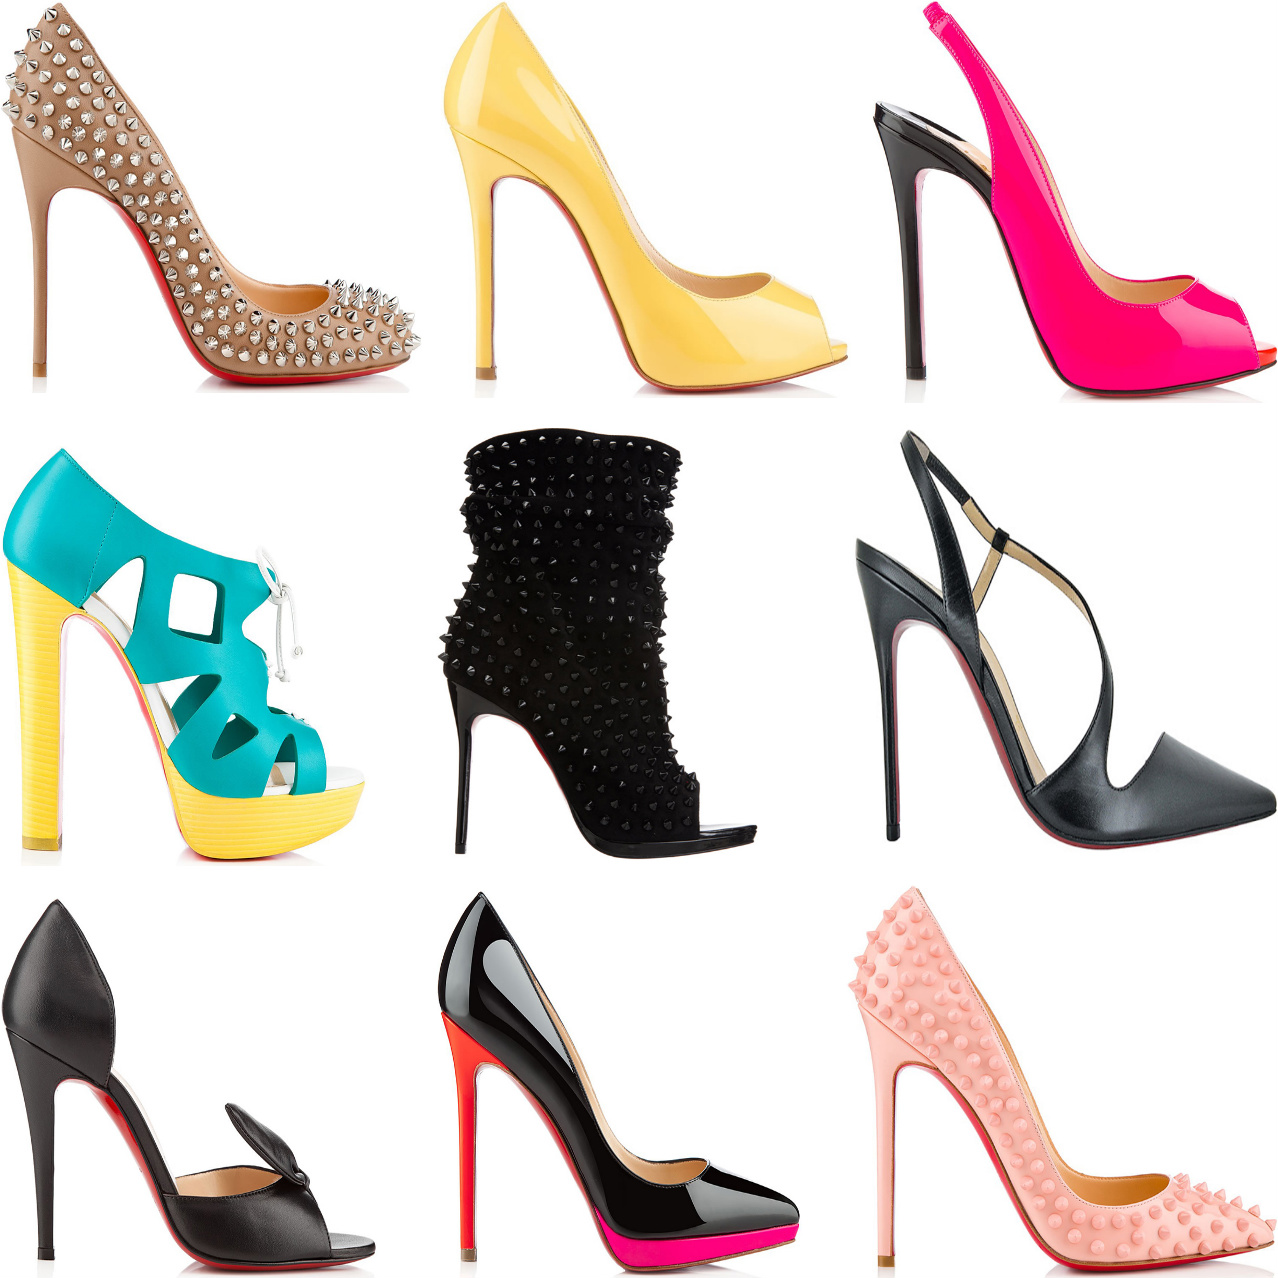 10 Christian Louboutin Shoes Every Girl Dreams To Have! | Cataclou Red ...